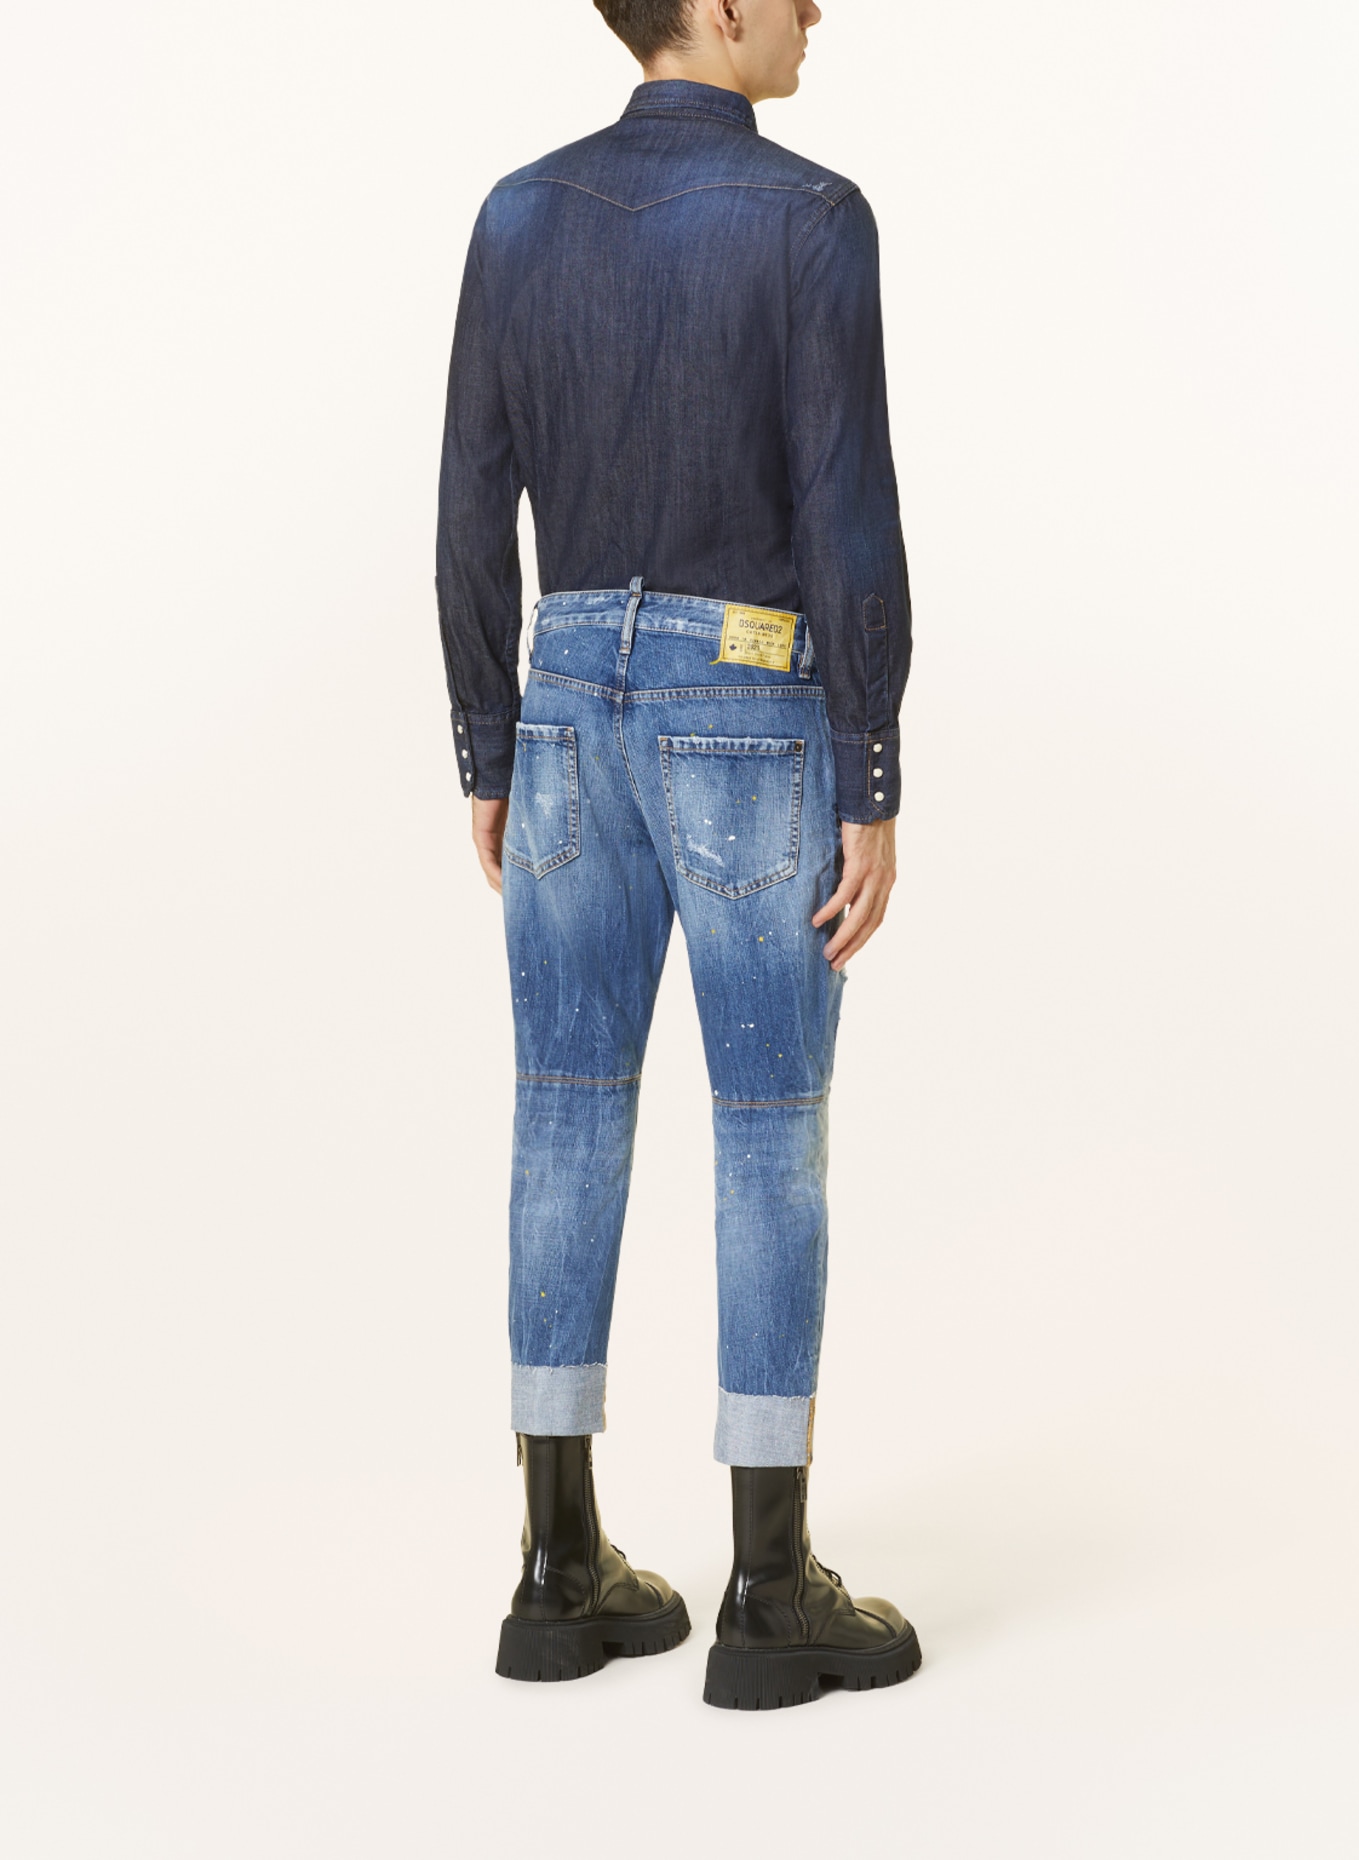 DSQUARED2 Destroyed-Jeans SAILOR Cropped Fit, Farbe: 470 NAVY BLUE (Bild 3)